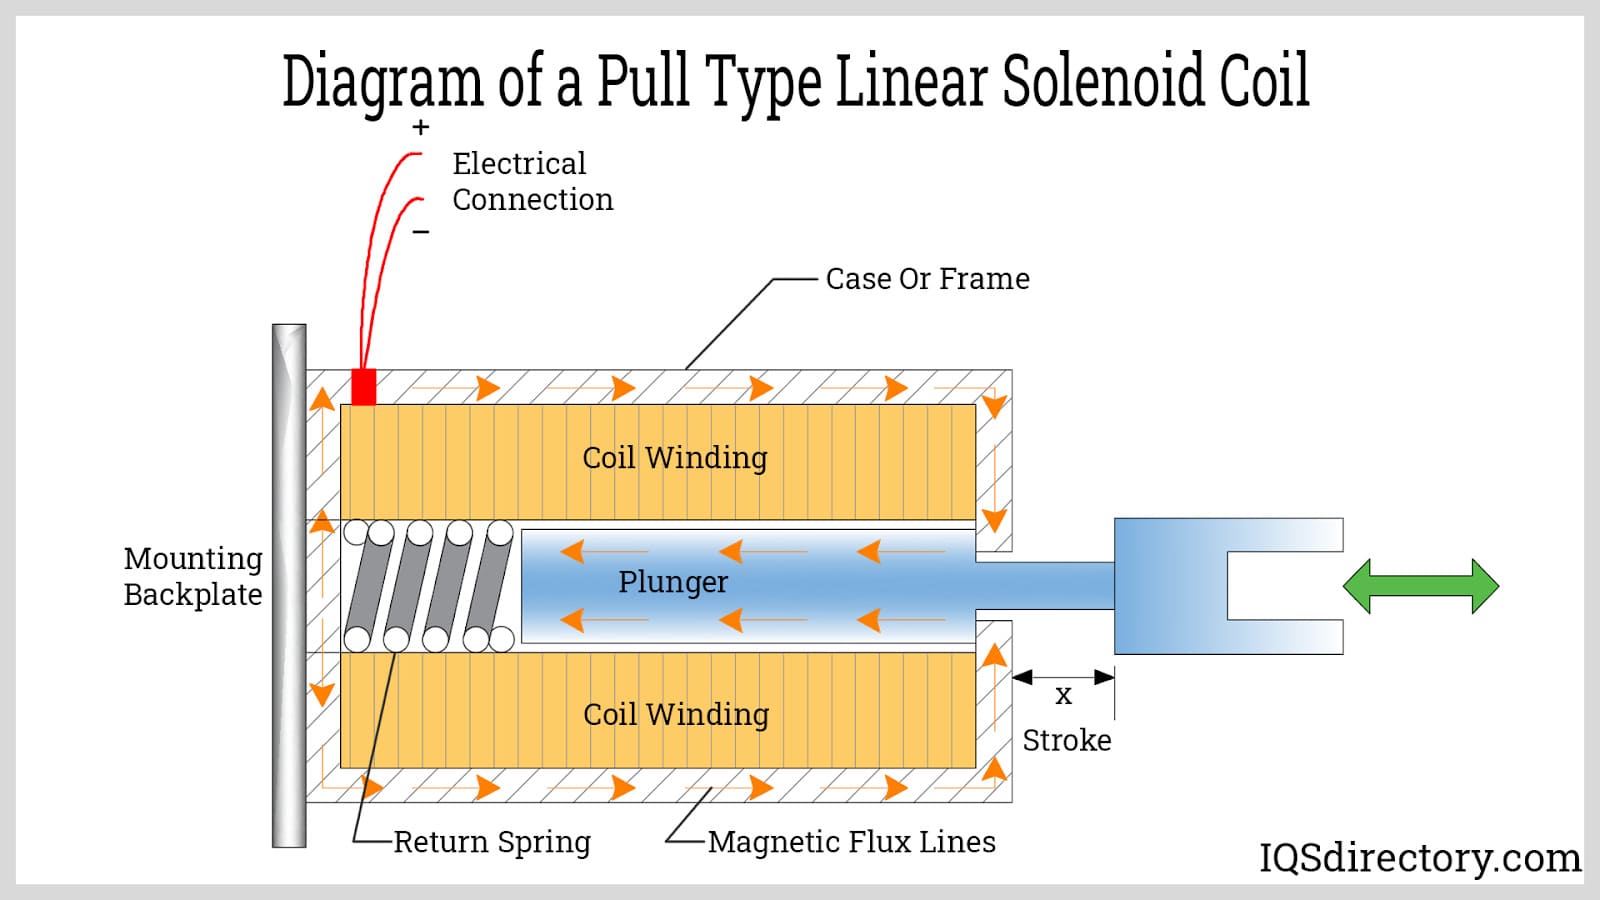 Diagram of a Pull Type Linear Solenoid Coil